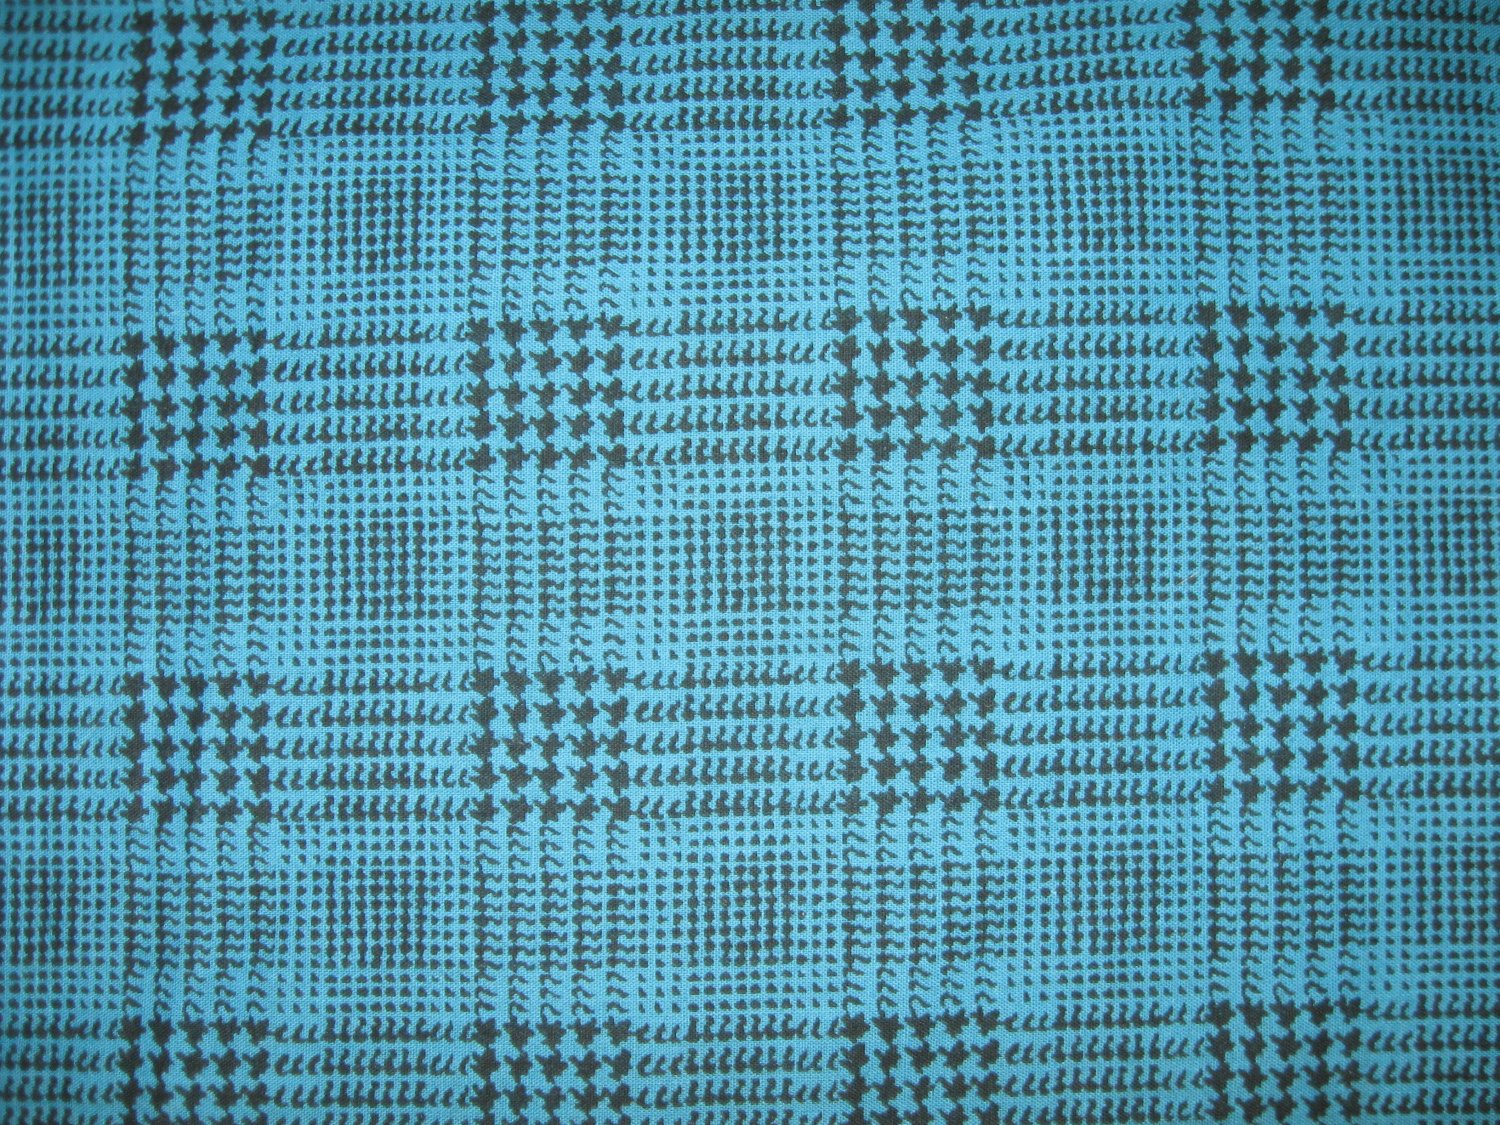 Turquois & black houndstooth print FABRIC FOR McCall's 6480 SKIRT C: 5/8 of a yard Plus tulle